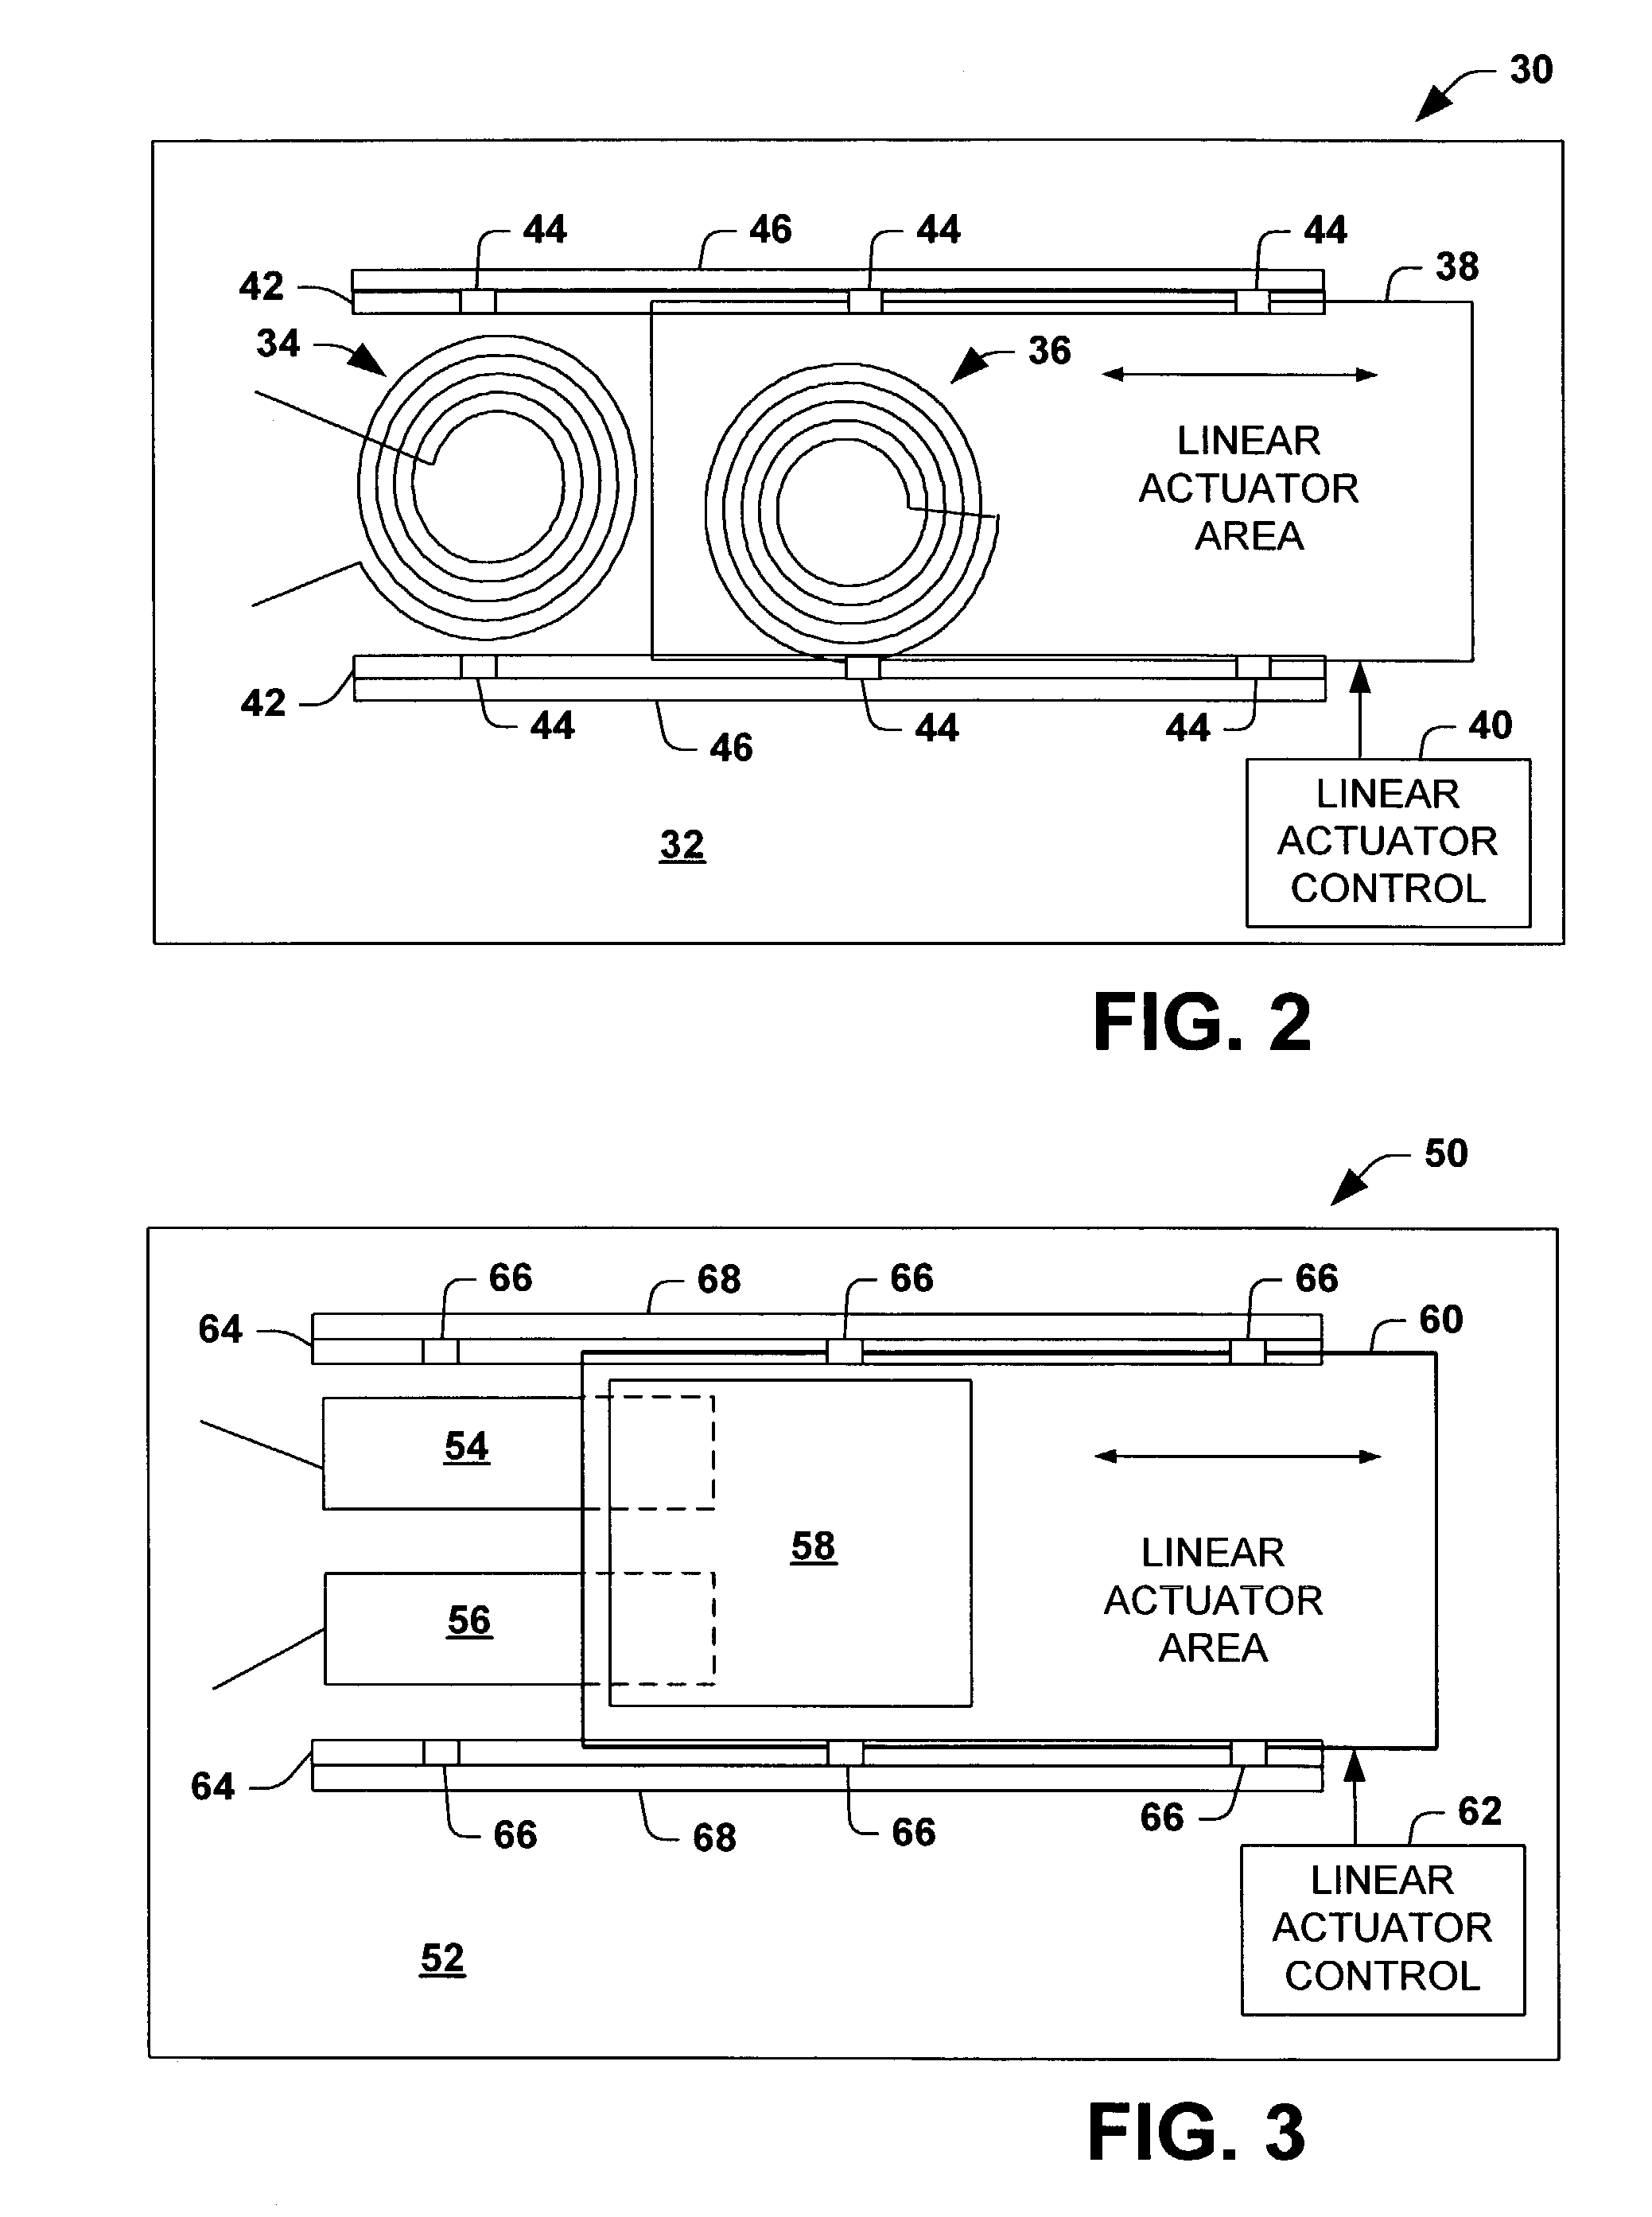 MEMS variable inductor and capacitor